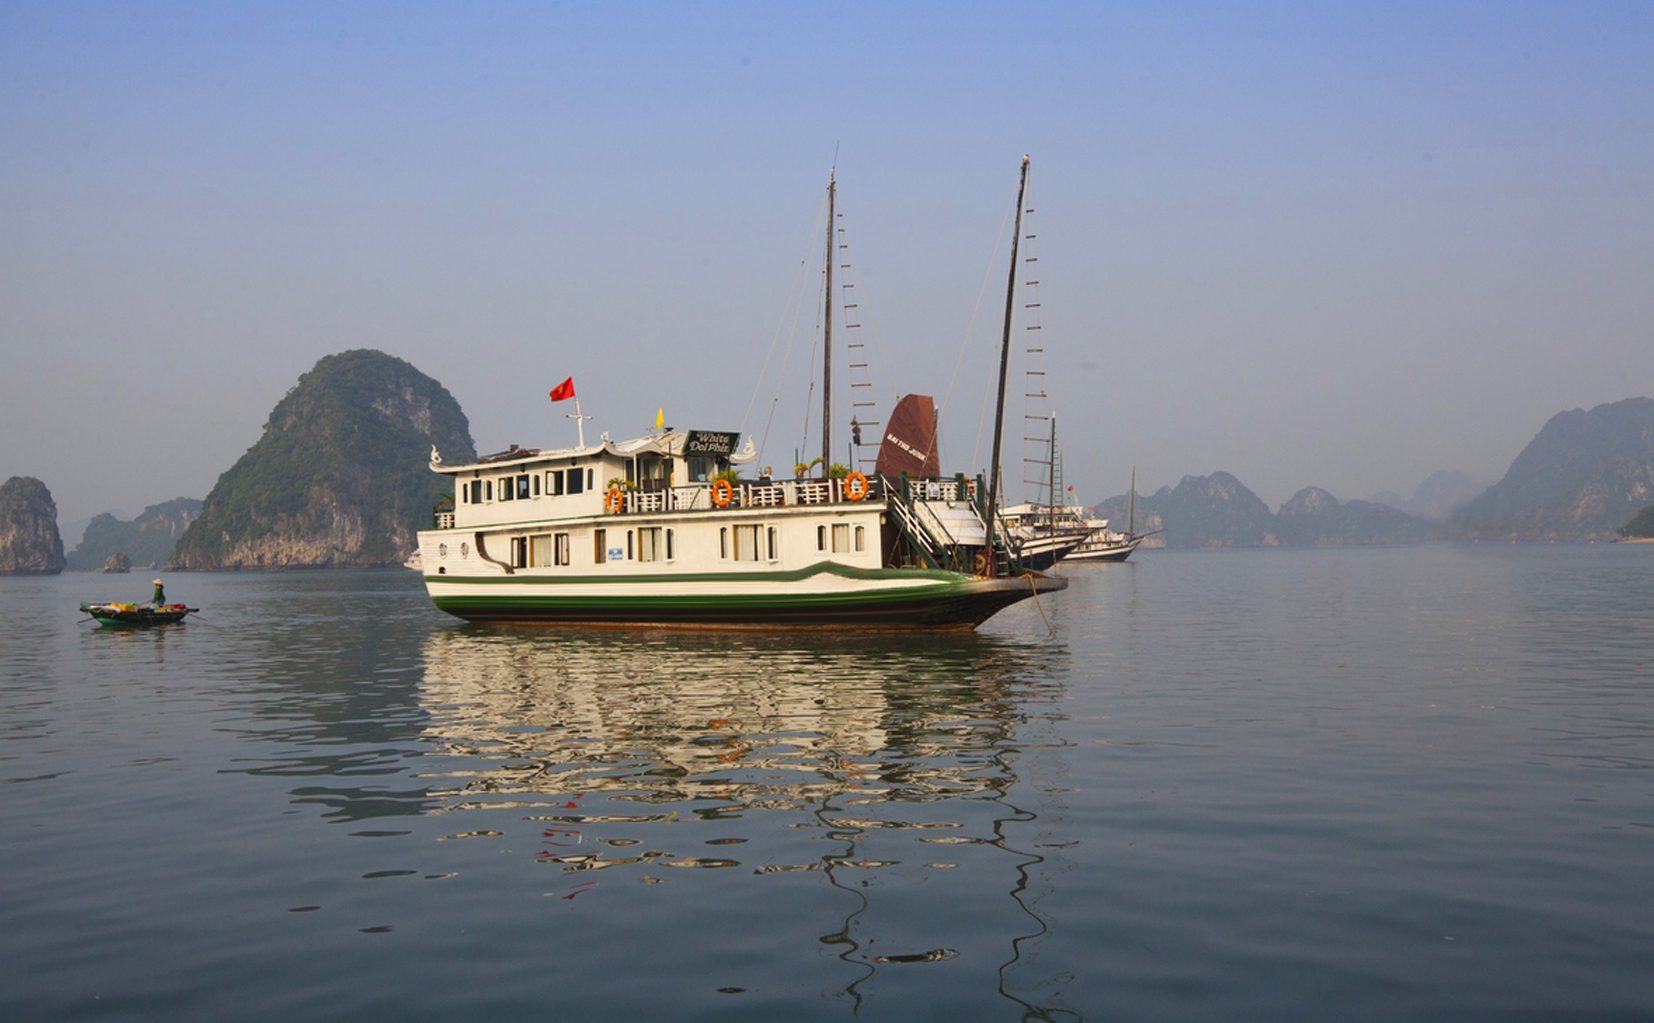 HA LONG BAY - 2 days and 1 night with Petit White Dolphin cruise ( 3 star  cruise – Boat with 4 cabins )